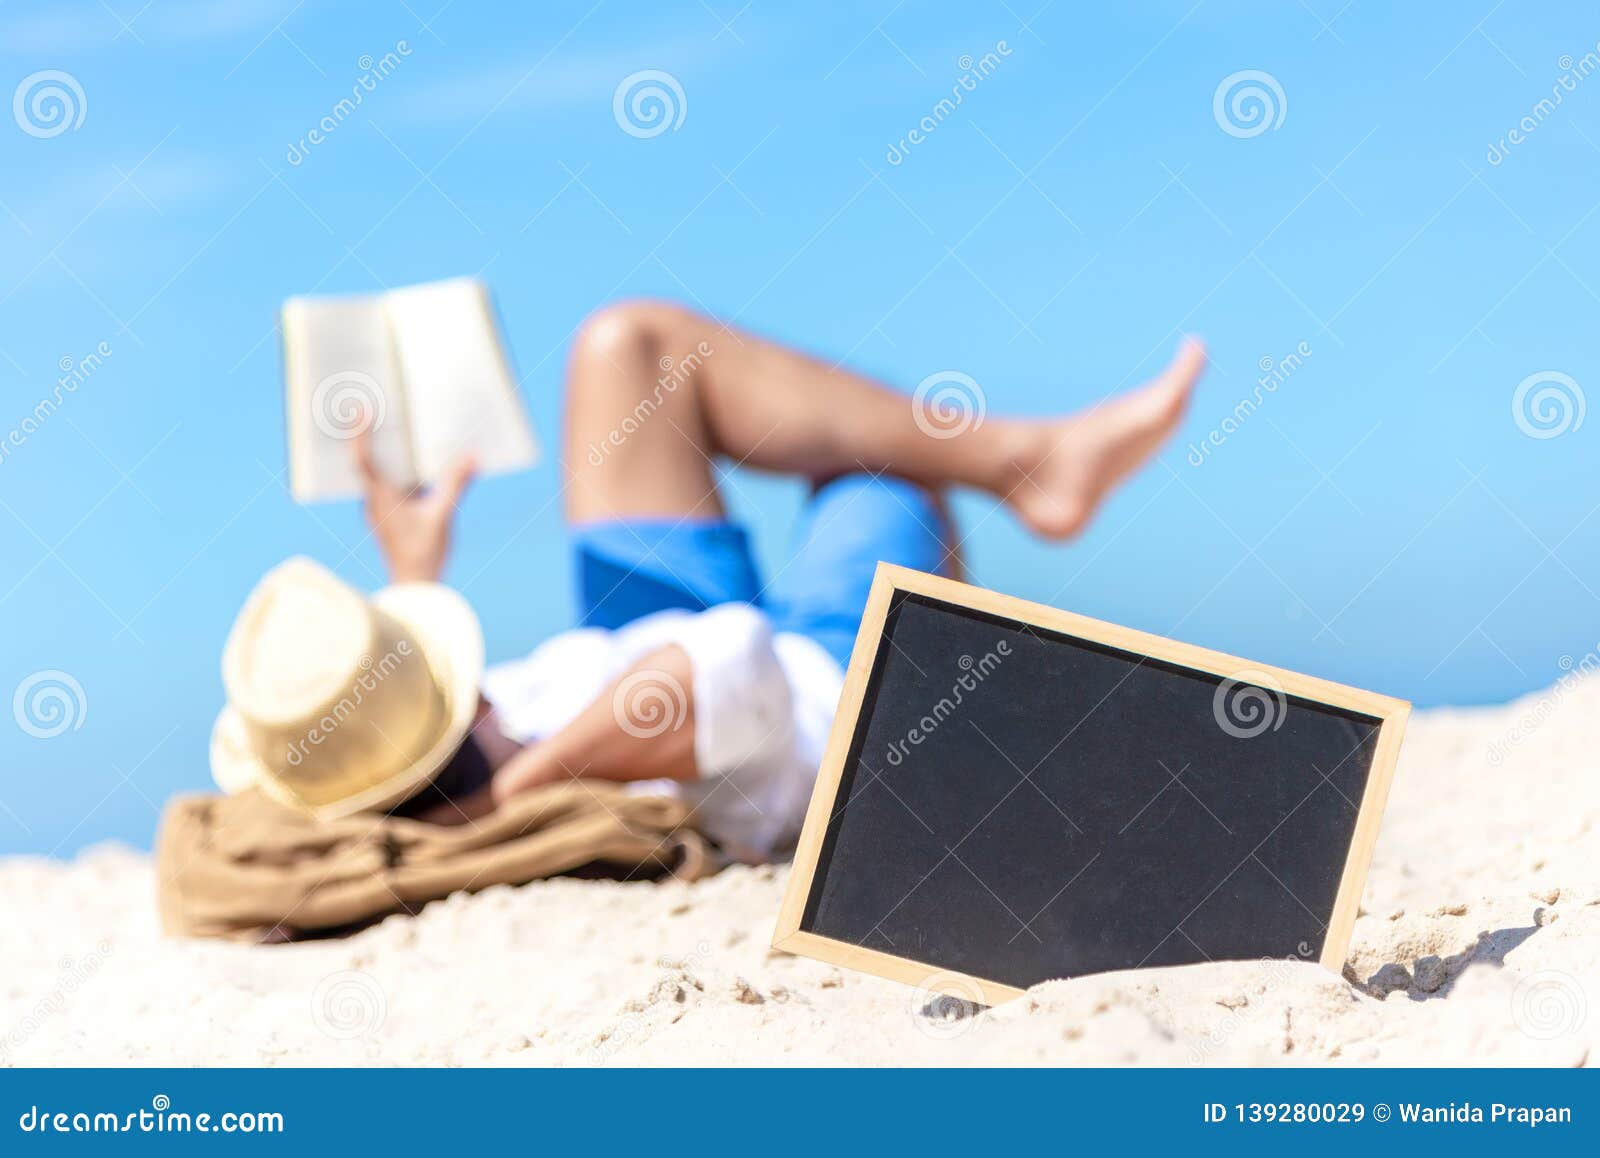 close up of a chalkboard on the sand of a beach, background happy smiling caucasian tourist asian young man relax and reading book